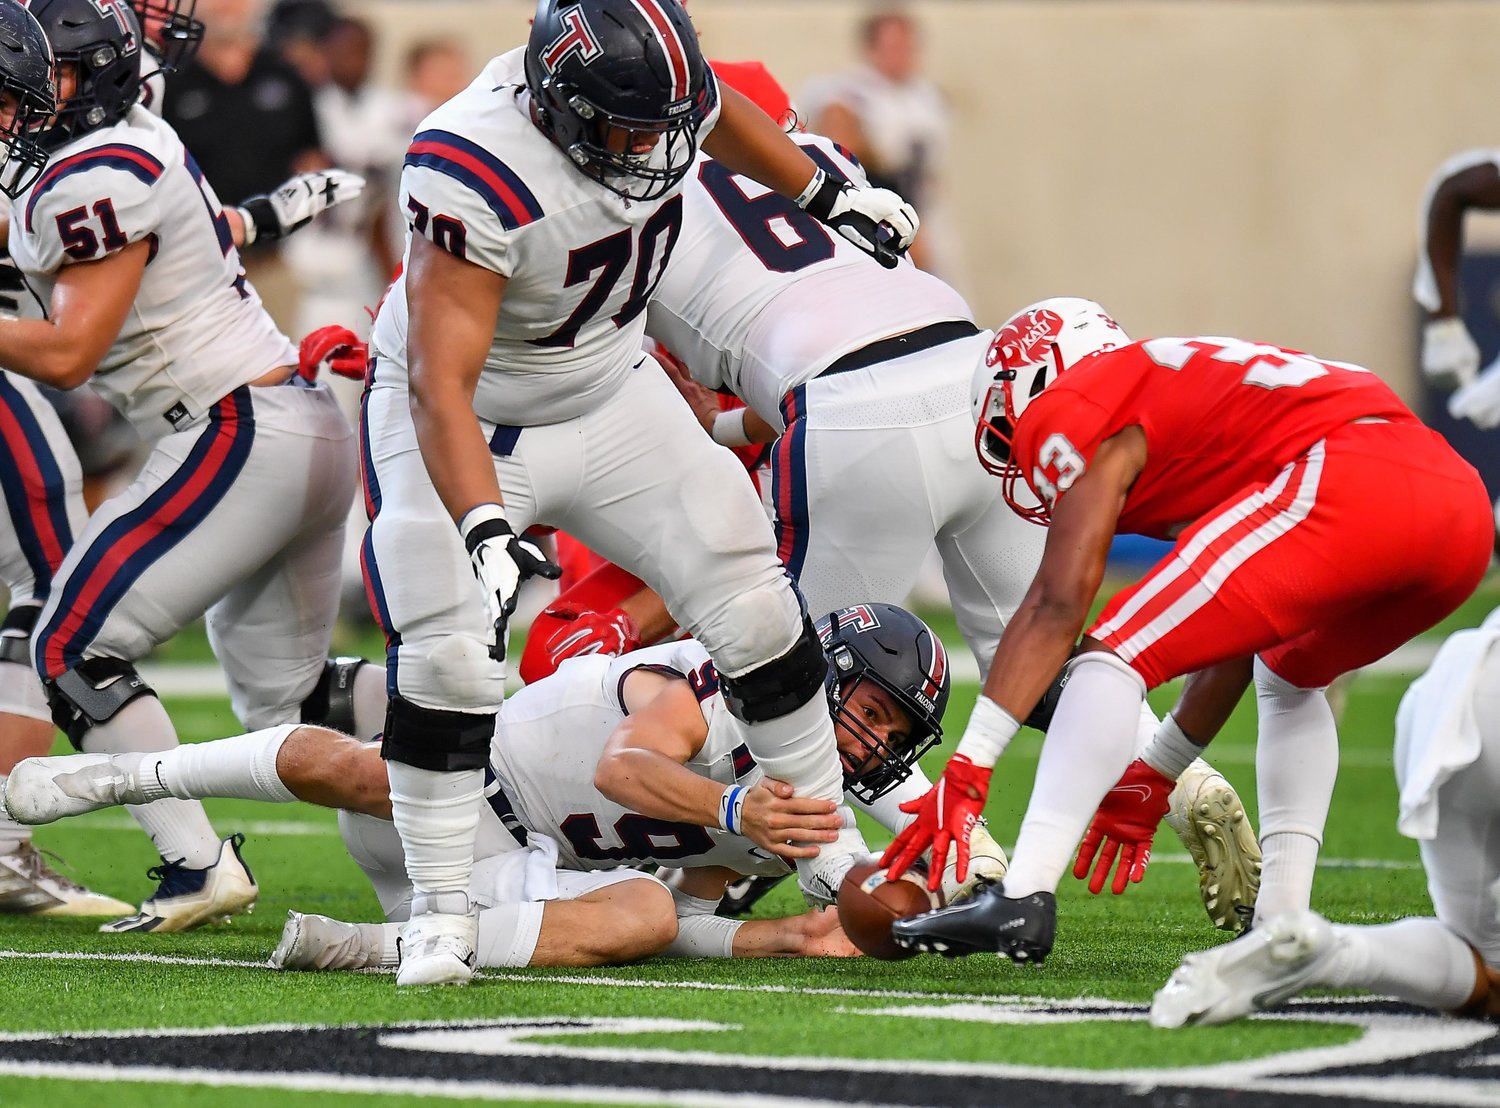 Katy, Tx. Oct 1, 2021:  A Tompkins fumble leads to a Katy recovery during a conference game between Katy Tigers and Tompkins Tompkins Falcons at Legacy Stadium. (Photo by Mark Goodman / Katy Times)